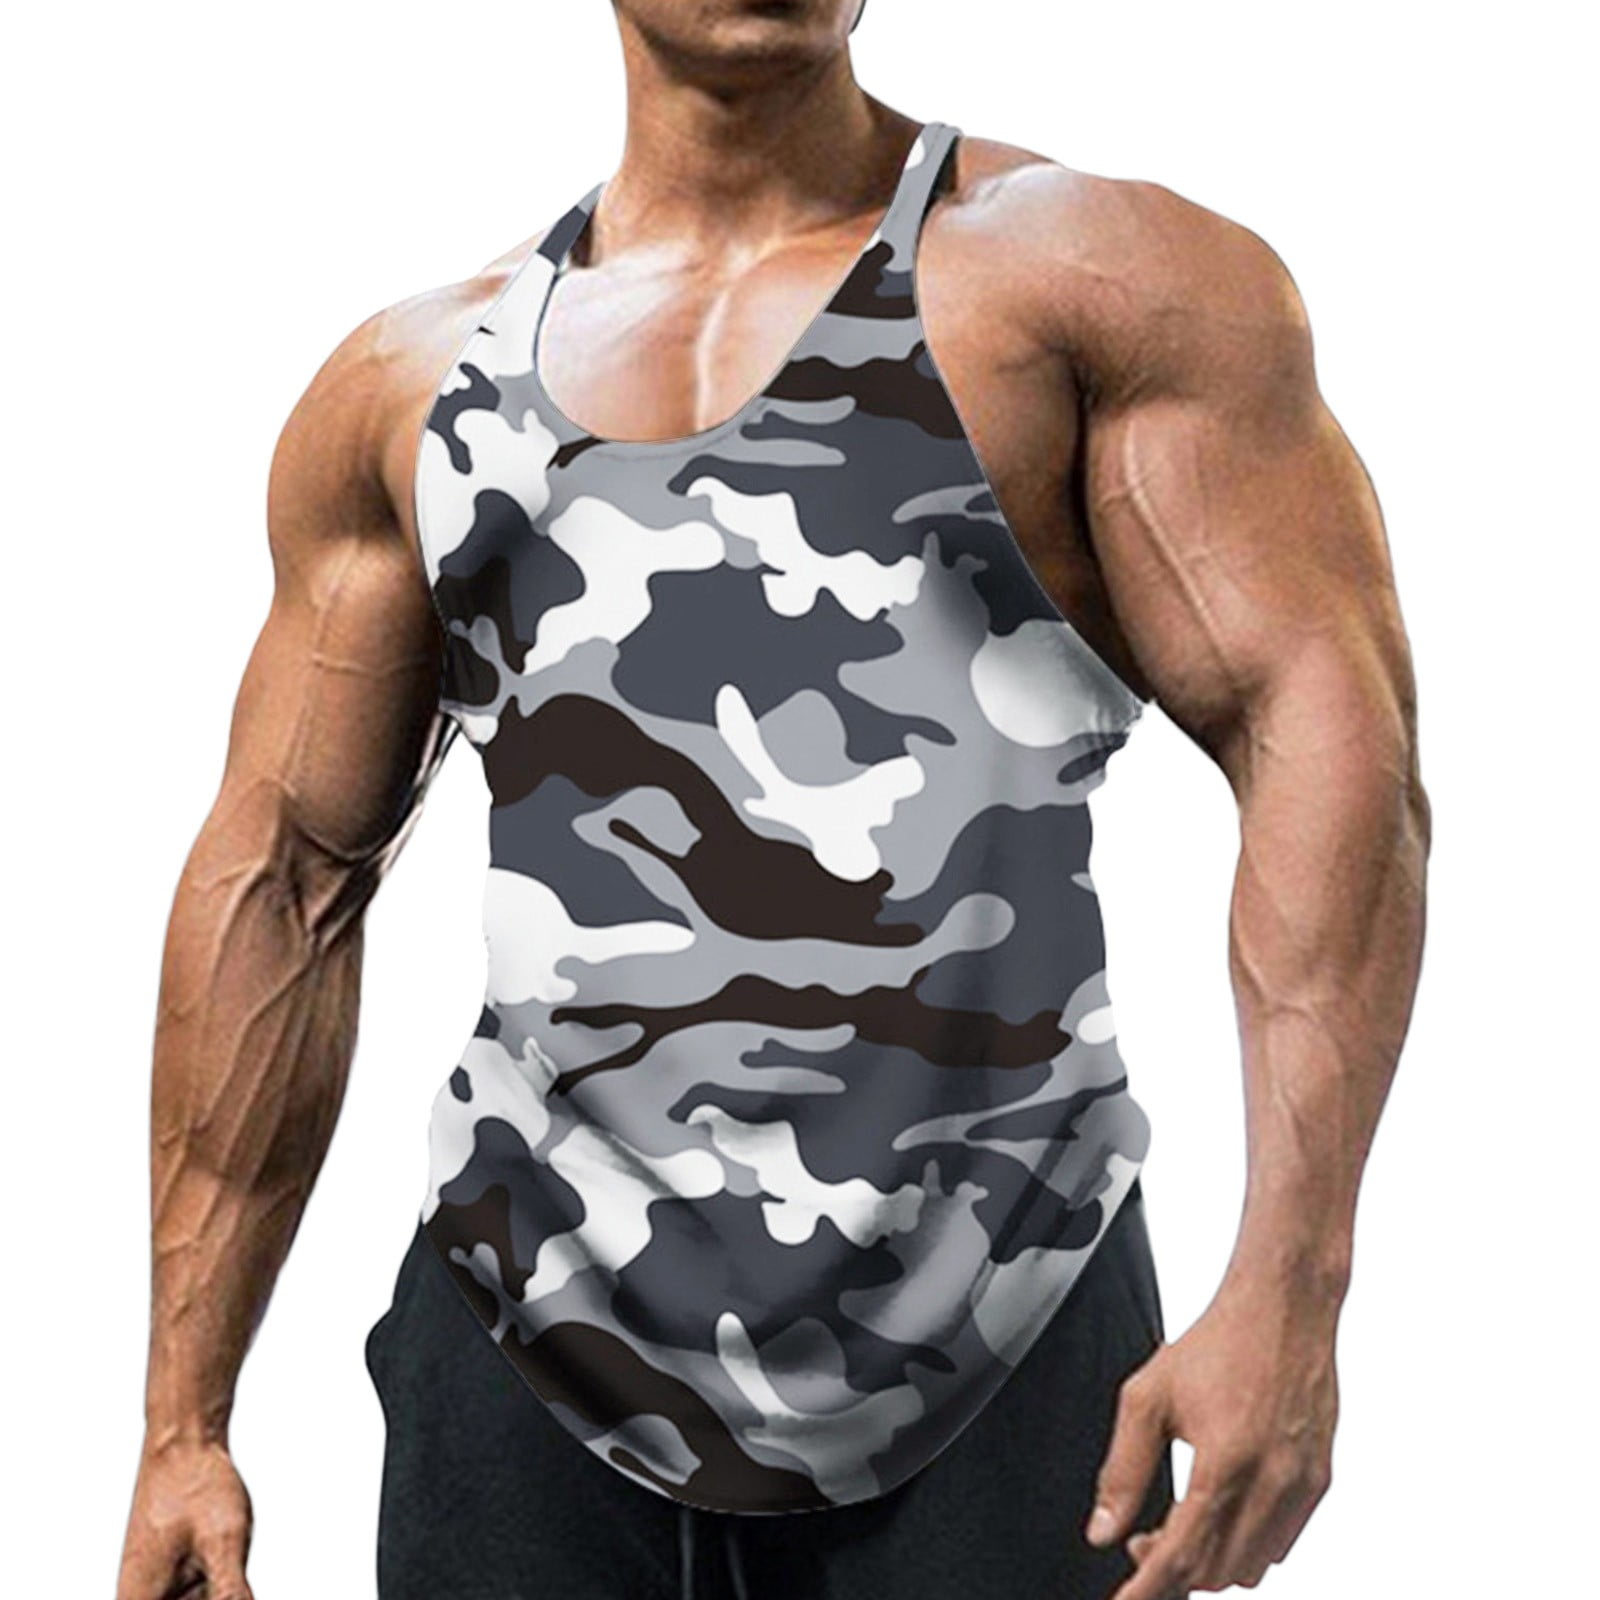 LLIMED Camouflage Tank Tops For Men Gym Bodybuilding Training Fitness ...